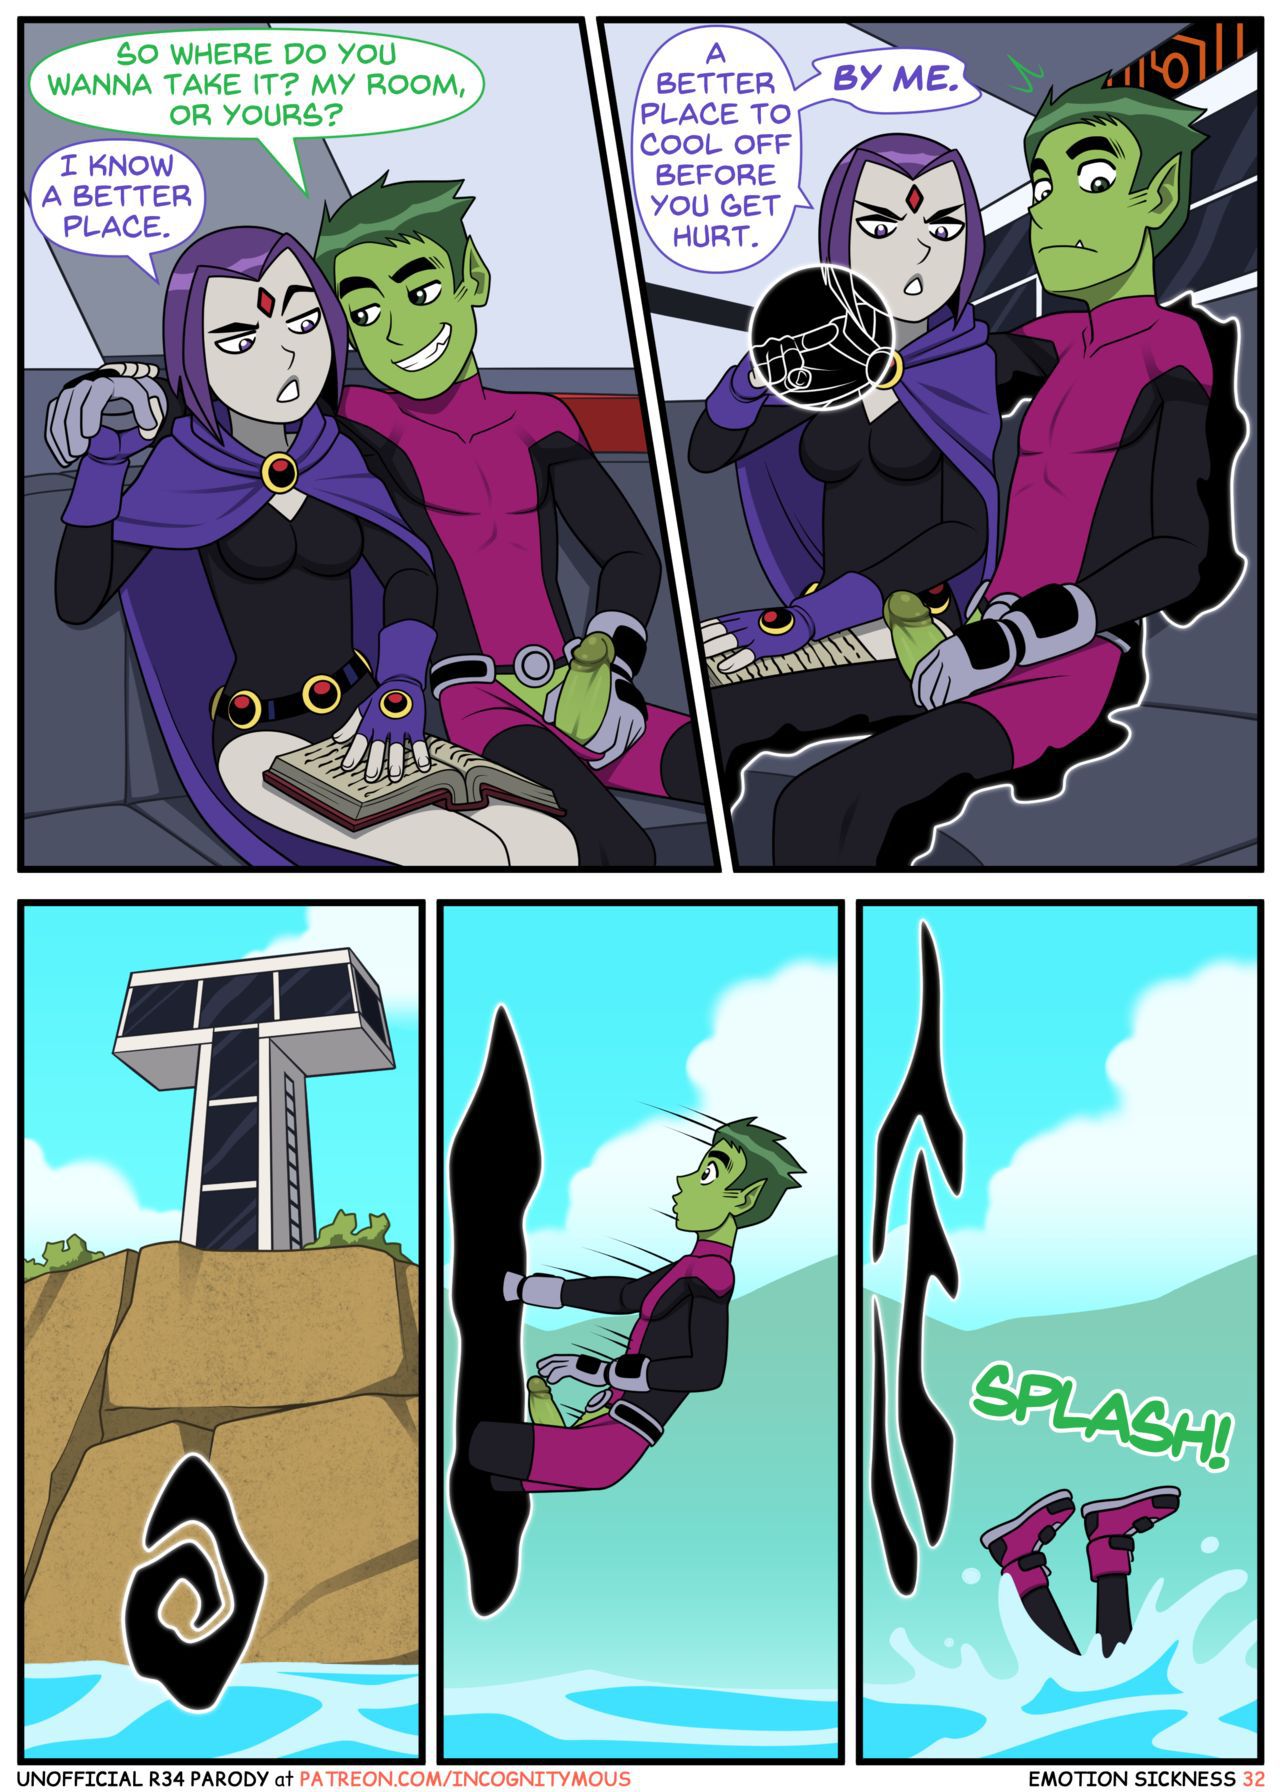 (Incognitymous) Teen Titans - Emotion Sickness(ongoing) 31